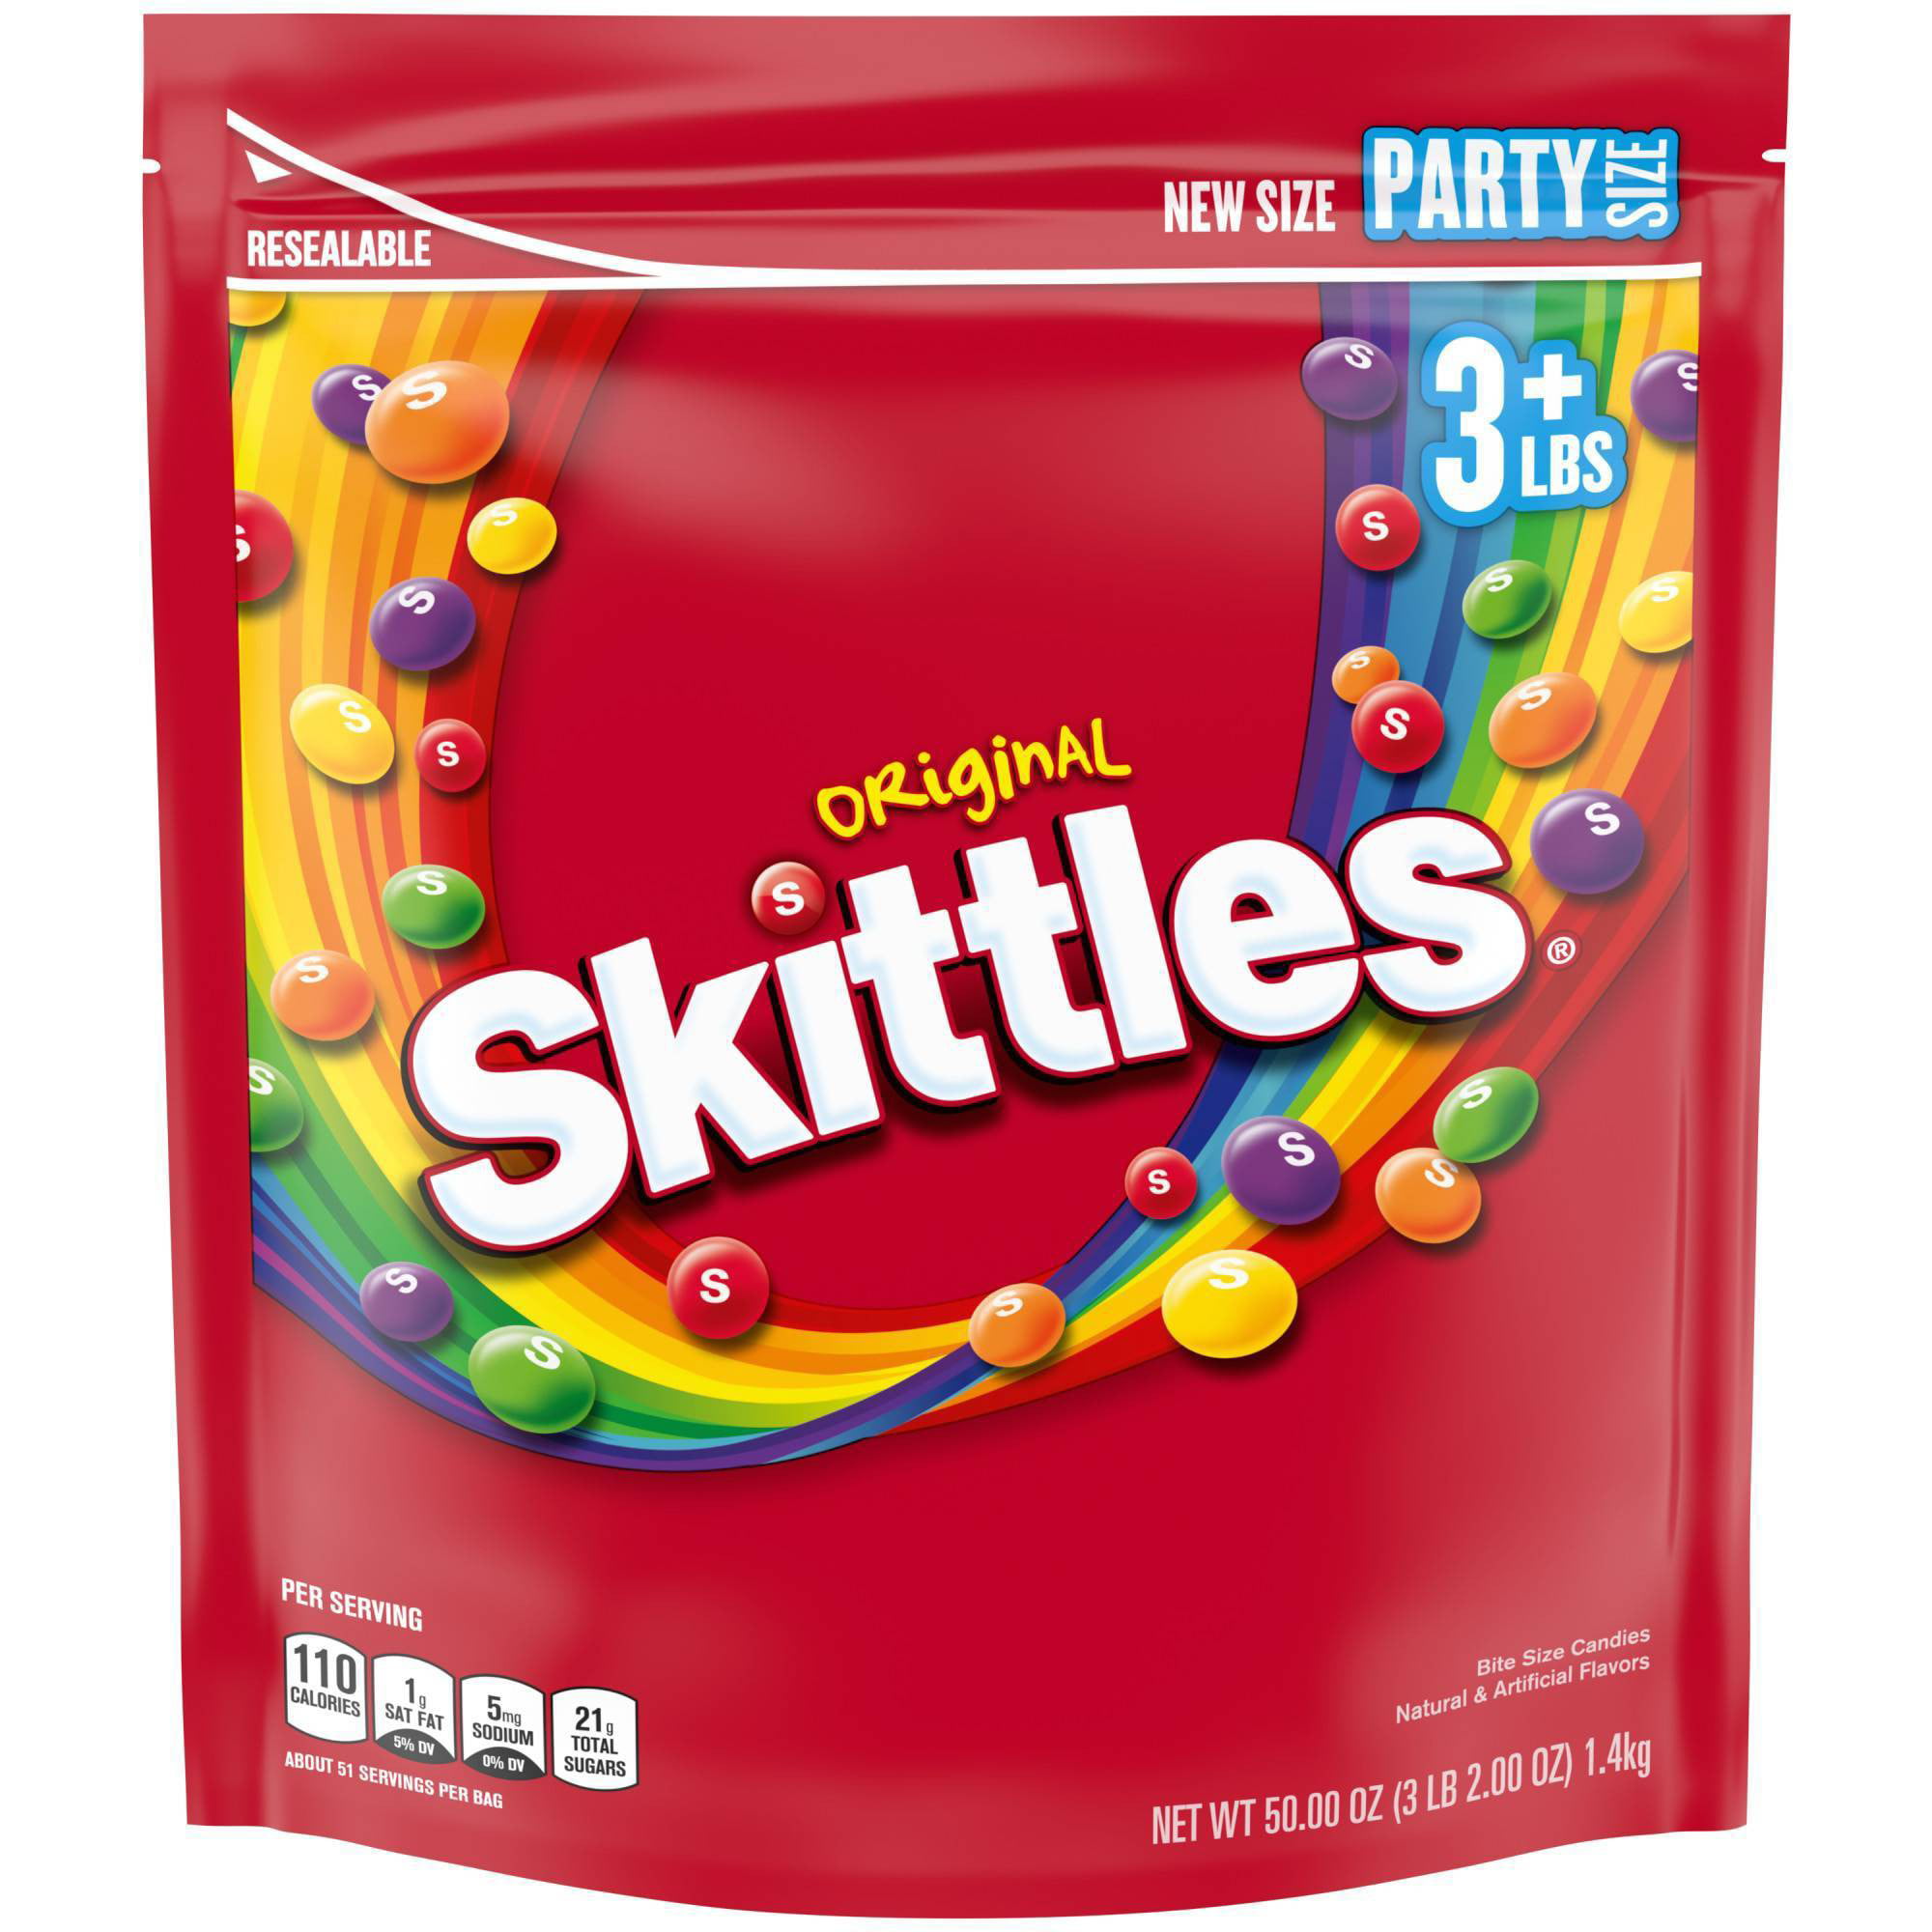 😅🏋️ Brianna's second HUGE Skittles order. All we're saying is